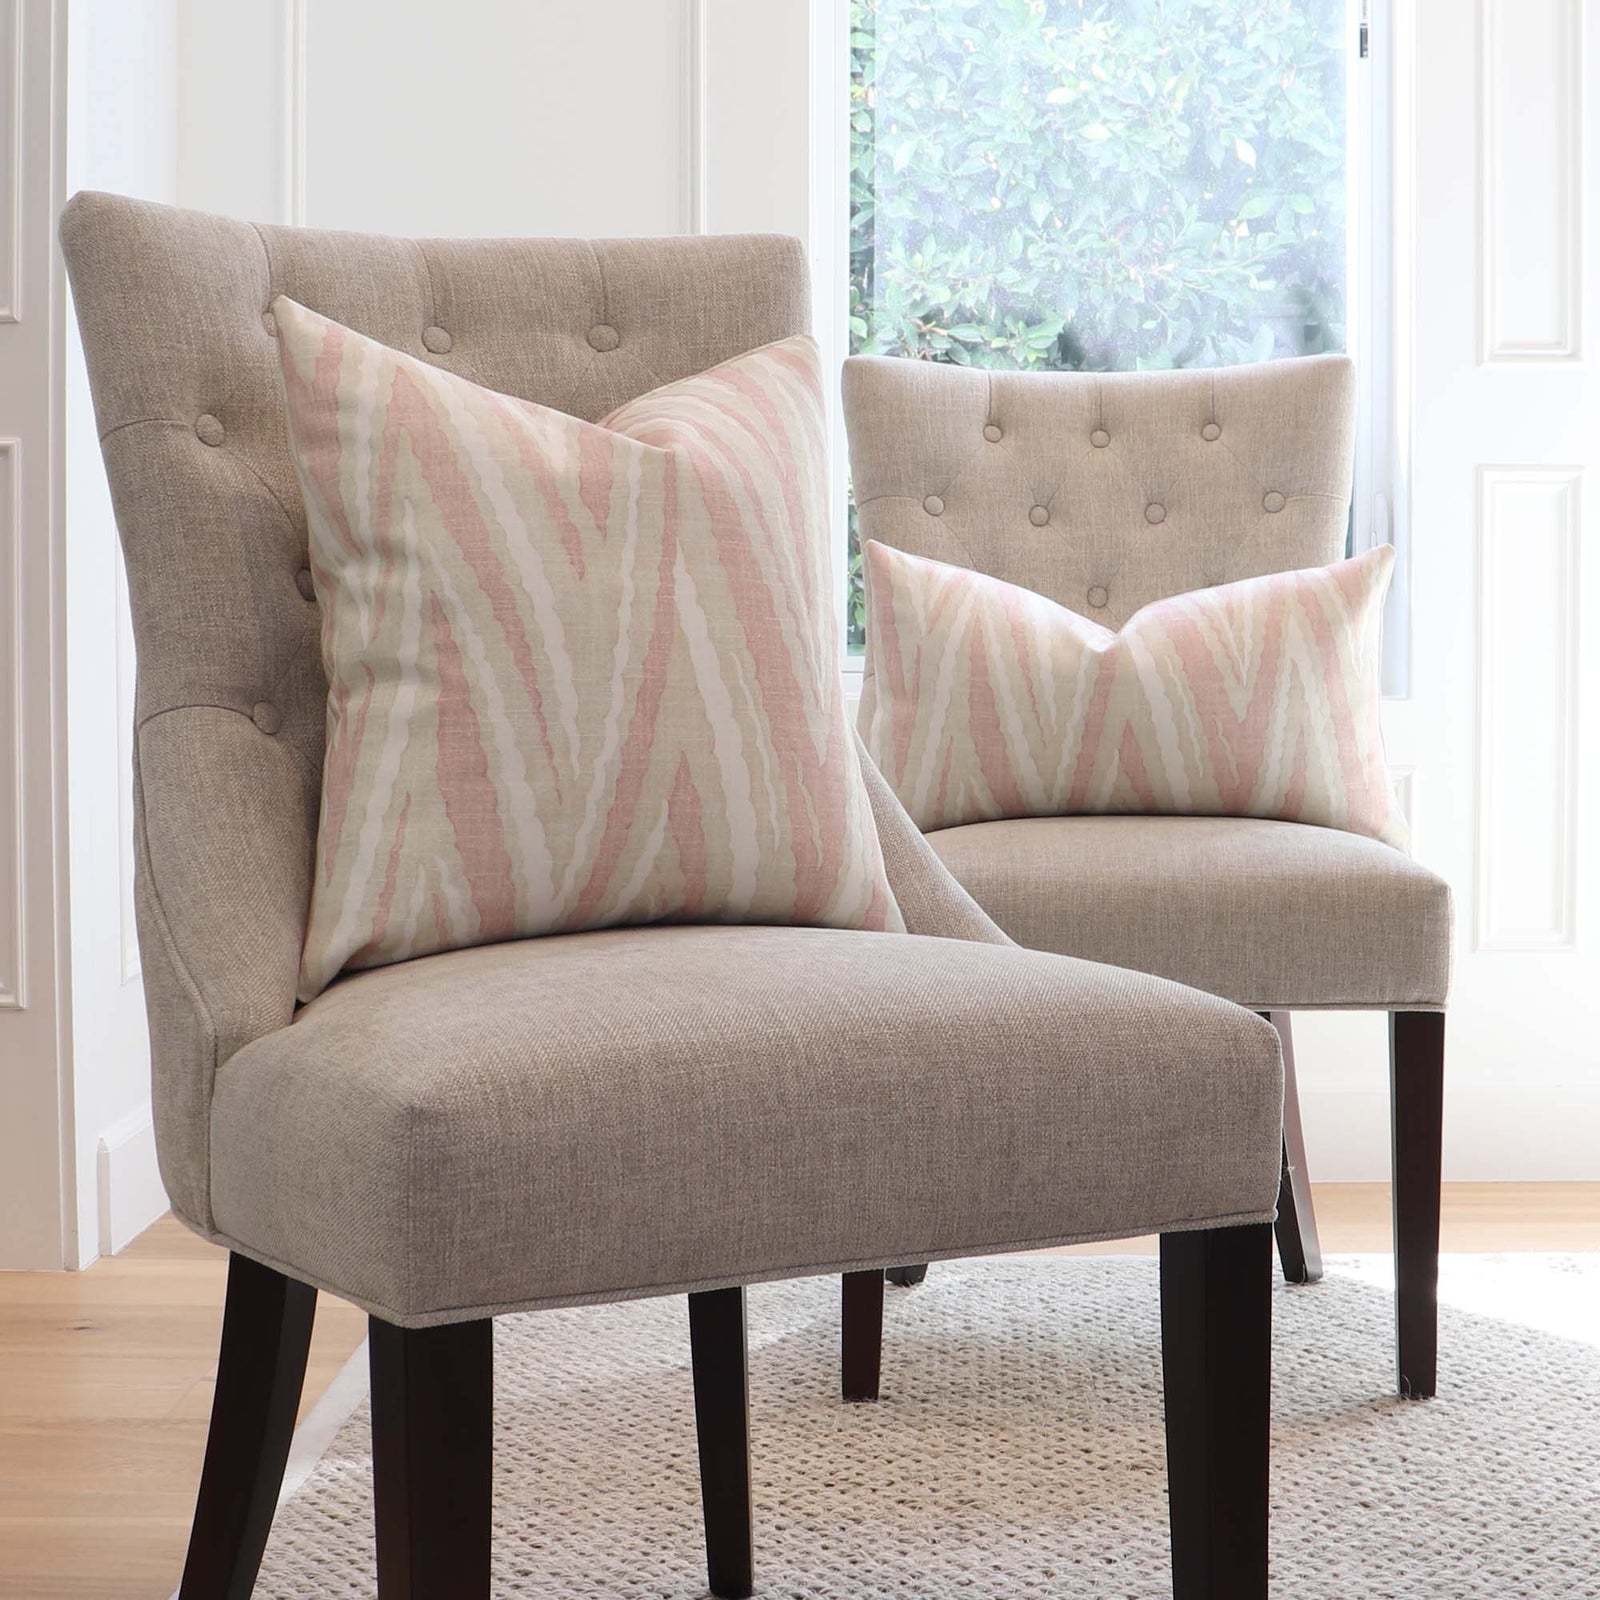 https://cdn.shopify.com/s/files/1/1116/9186/products/Thibaut-Anna-French-Highland-Peak-AF23142-Blush-Pink-Printed-Chevron-Linen-Designer-Decorative-Throw-Pillow-Cover-on-Dining-Chair-in-Home-Decor_1600x.jpg?v=1680730847